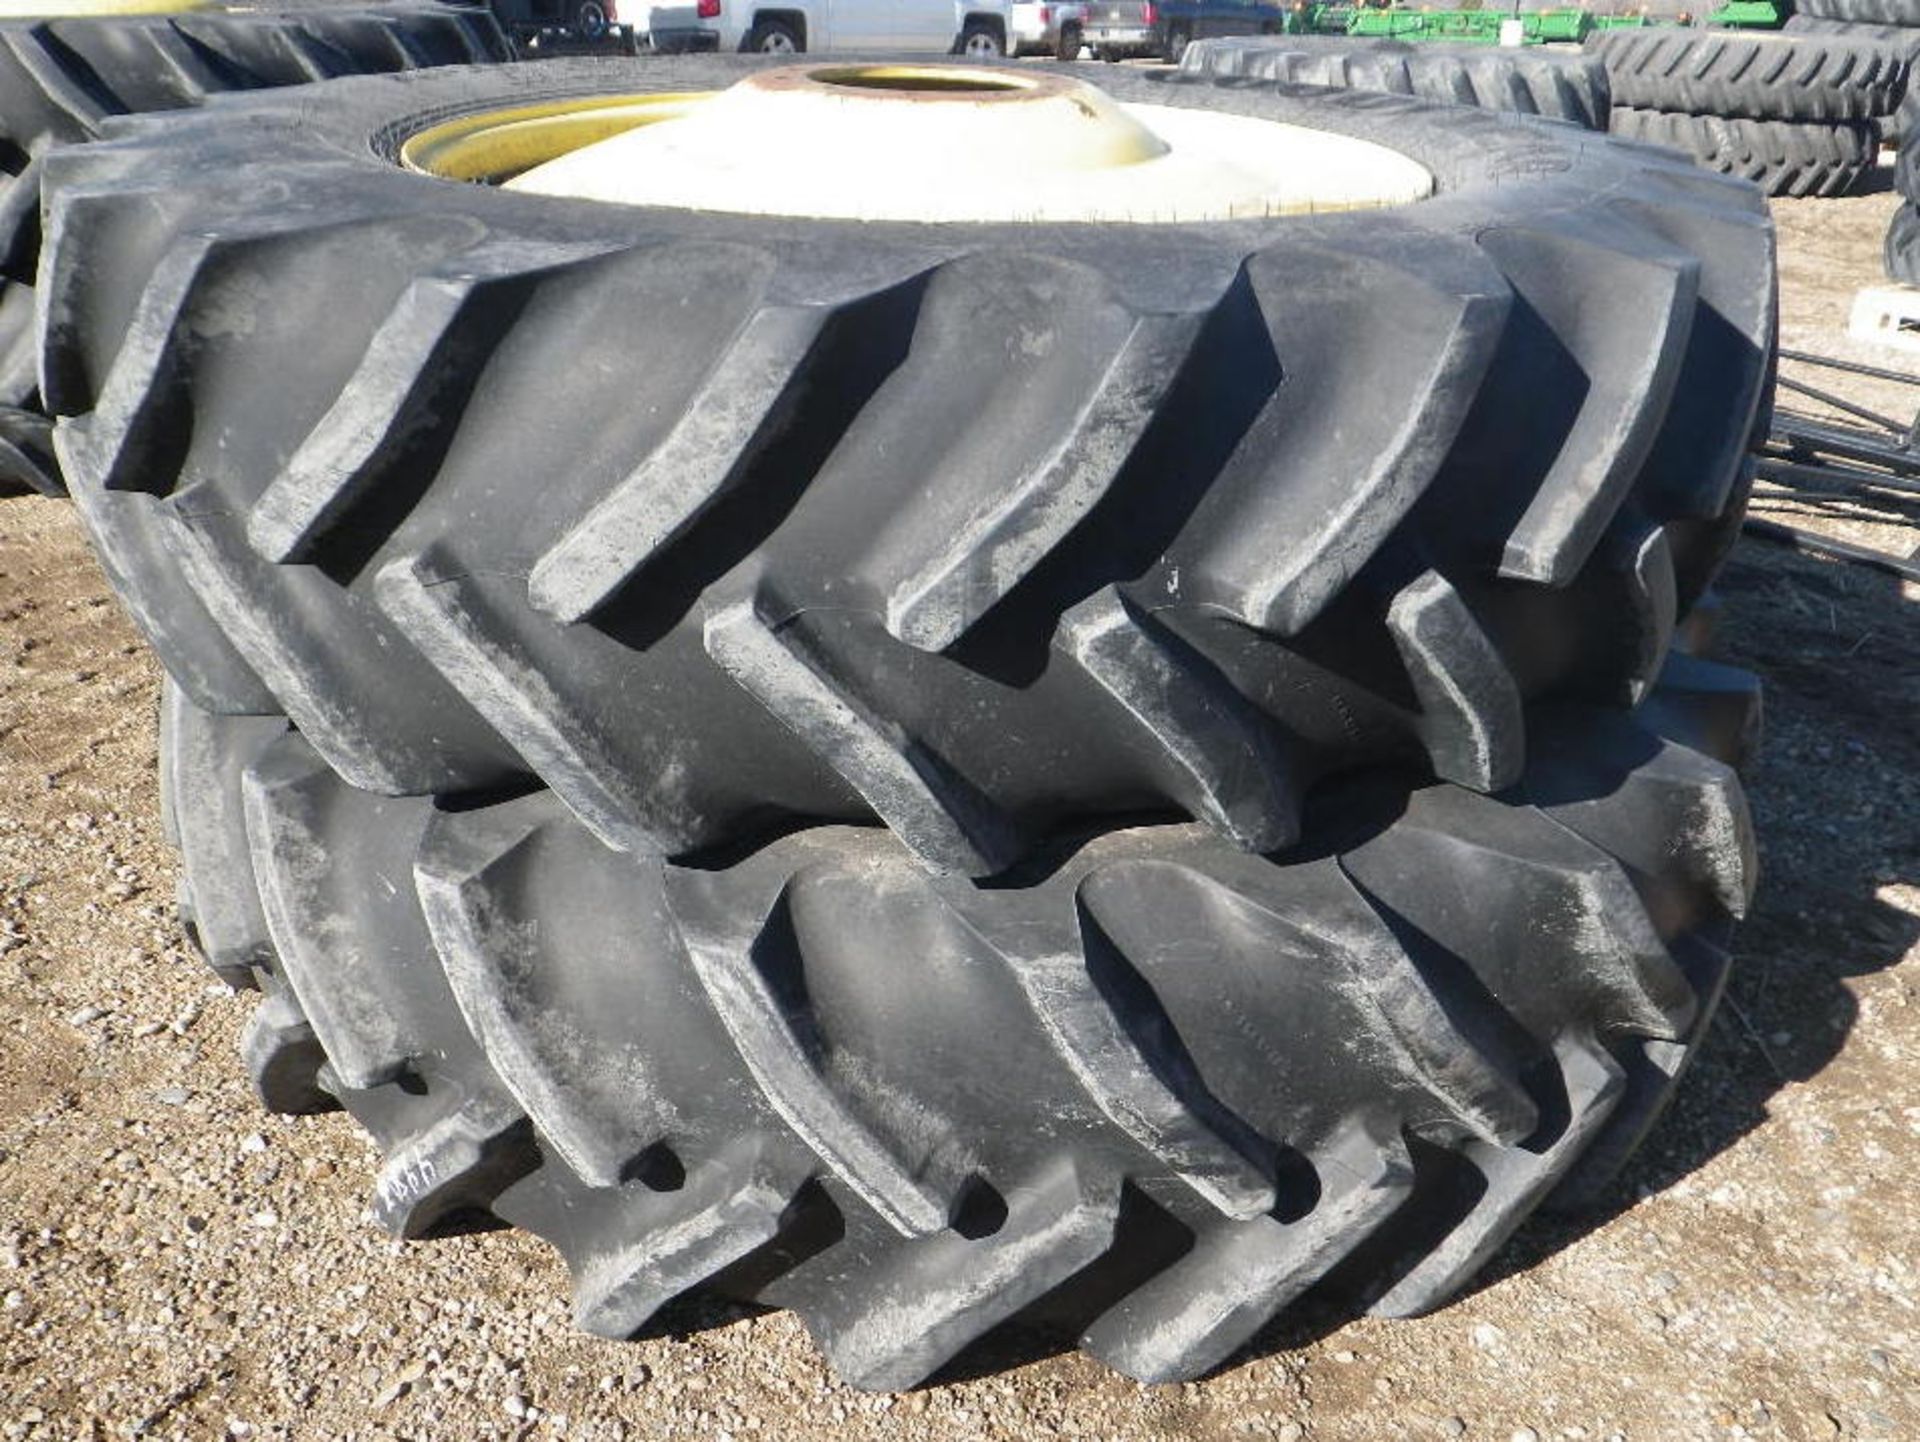 (38) 1 PAIR GY 520/85R46, 10 HOLE, 11" PILOT FOR TRACTOR - Image 2 of 3